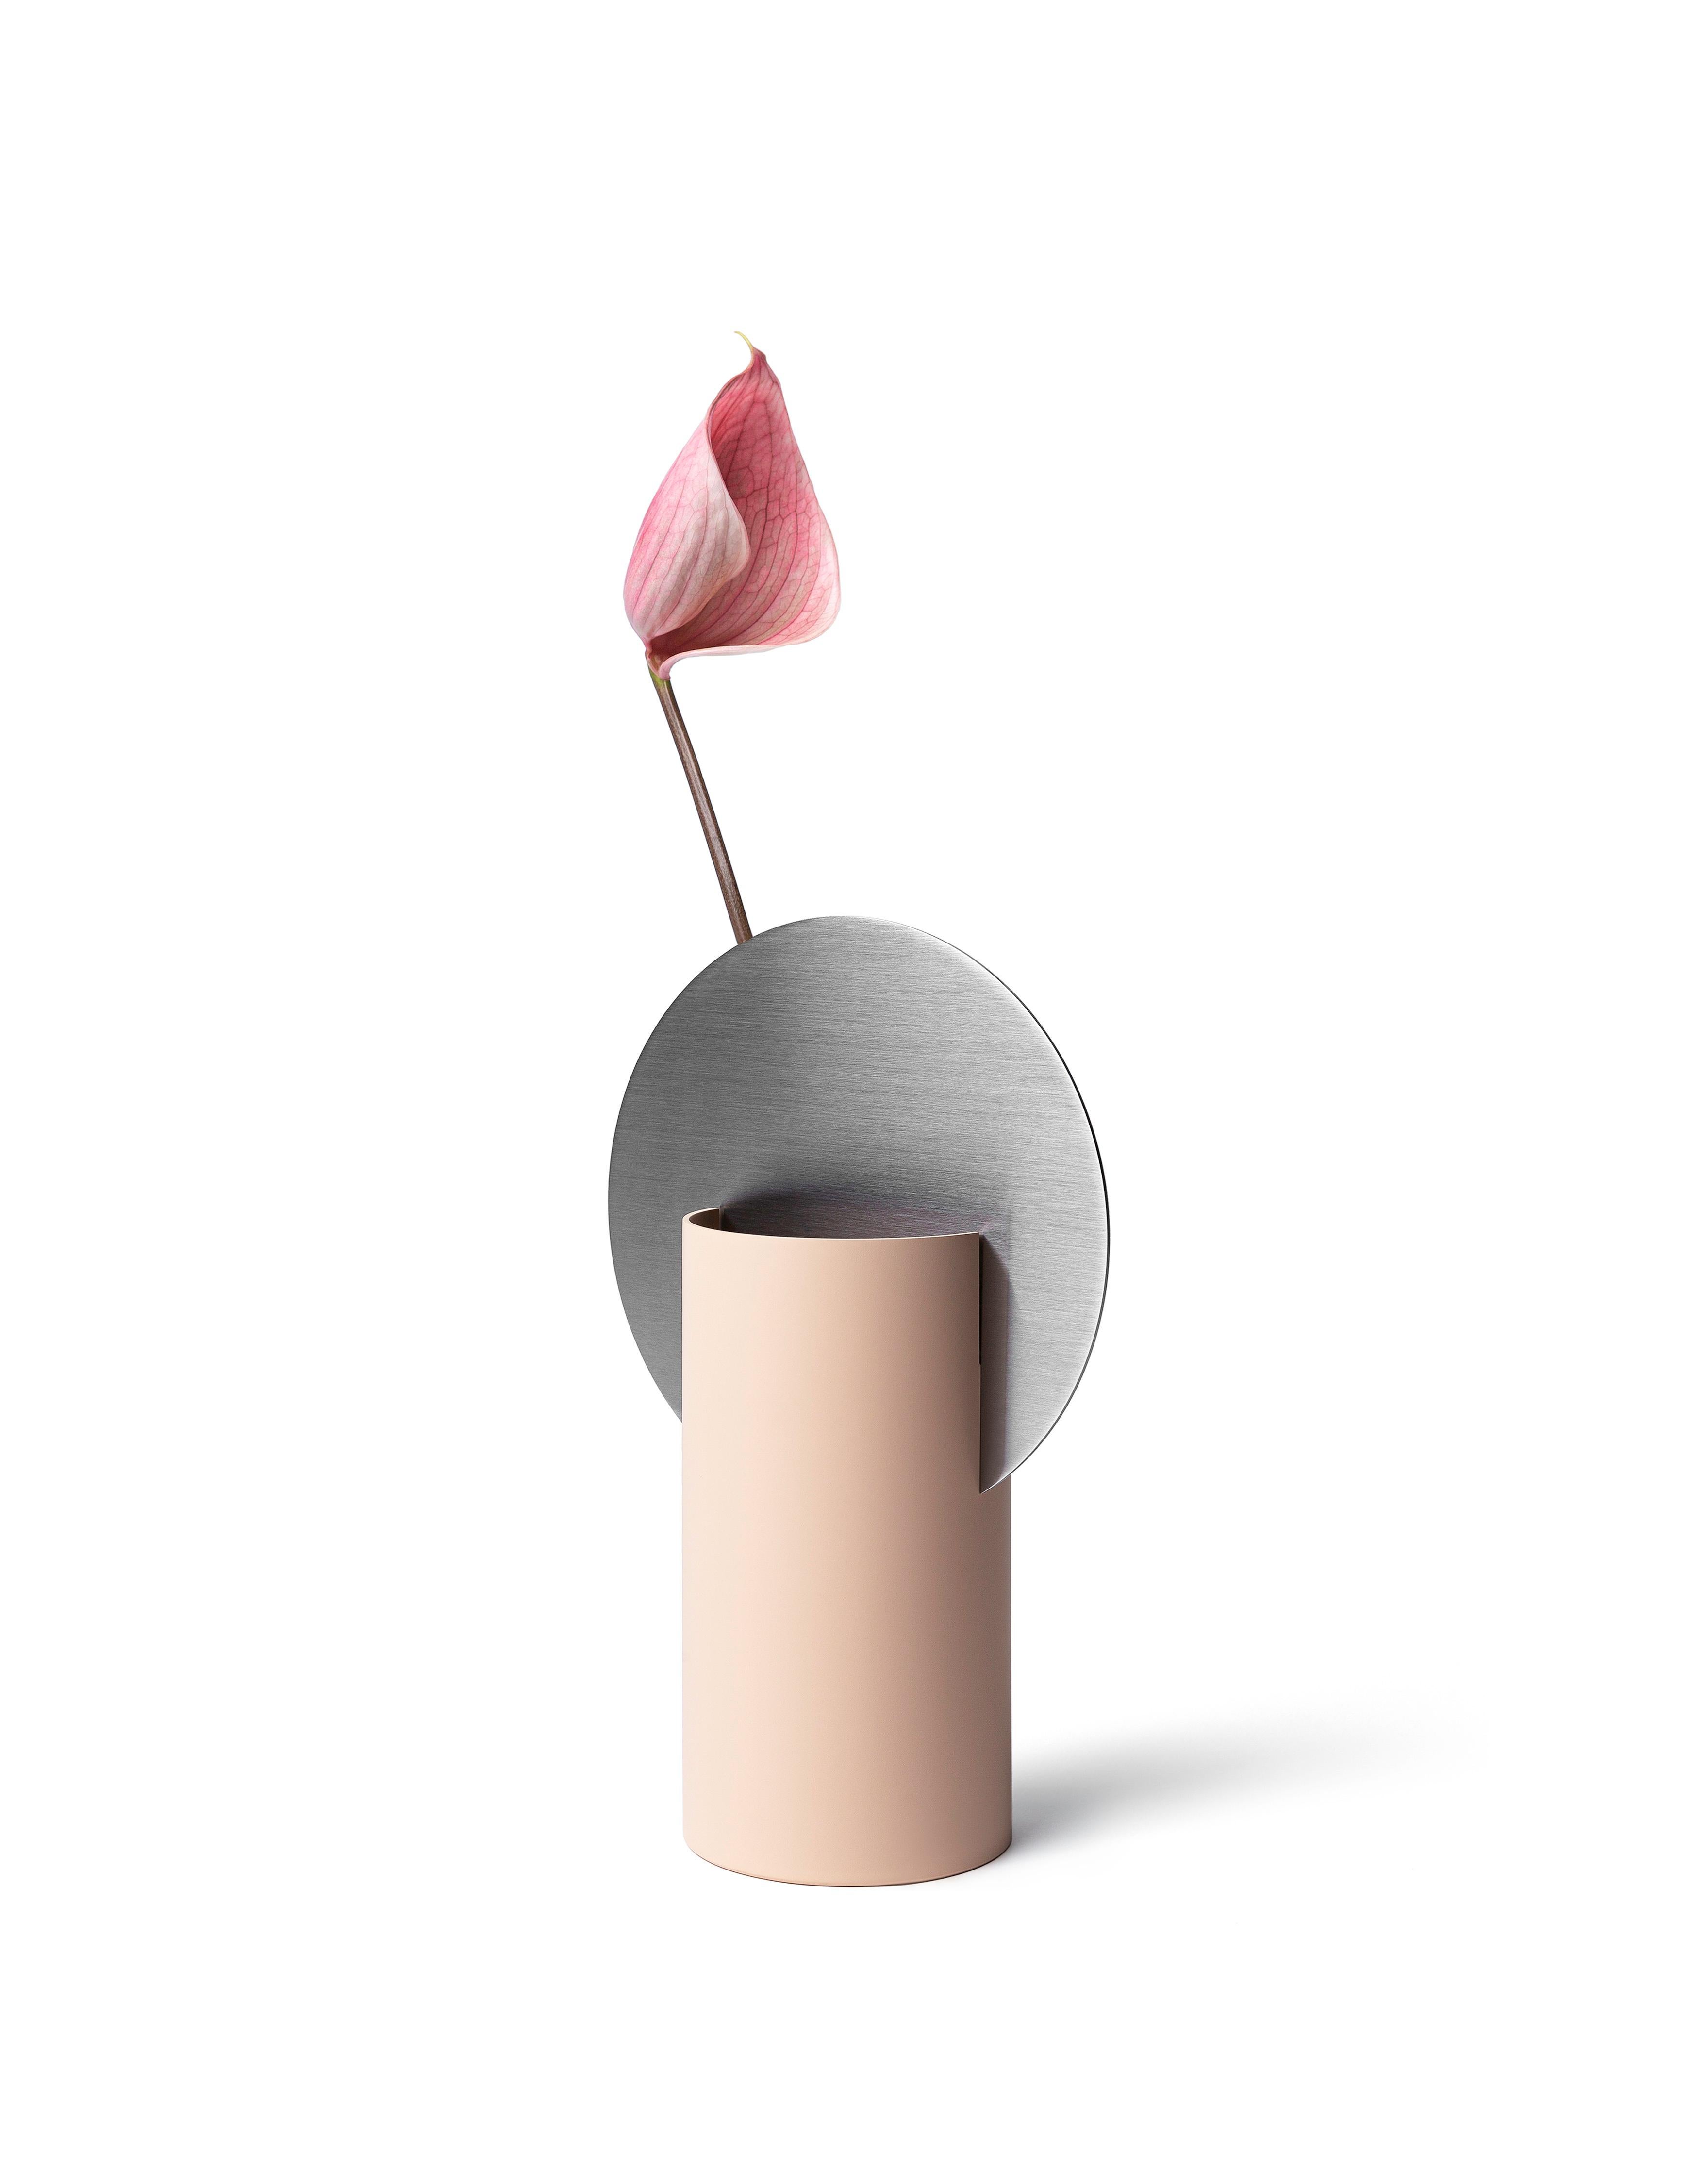 Contemporary Modern Malevich Vase CS8 by Noom with Brushed Stainless Steel